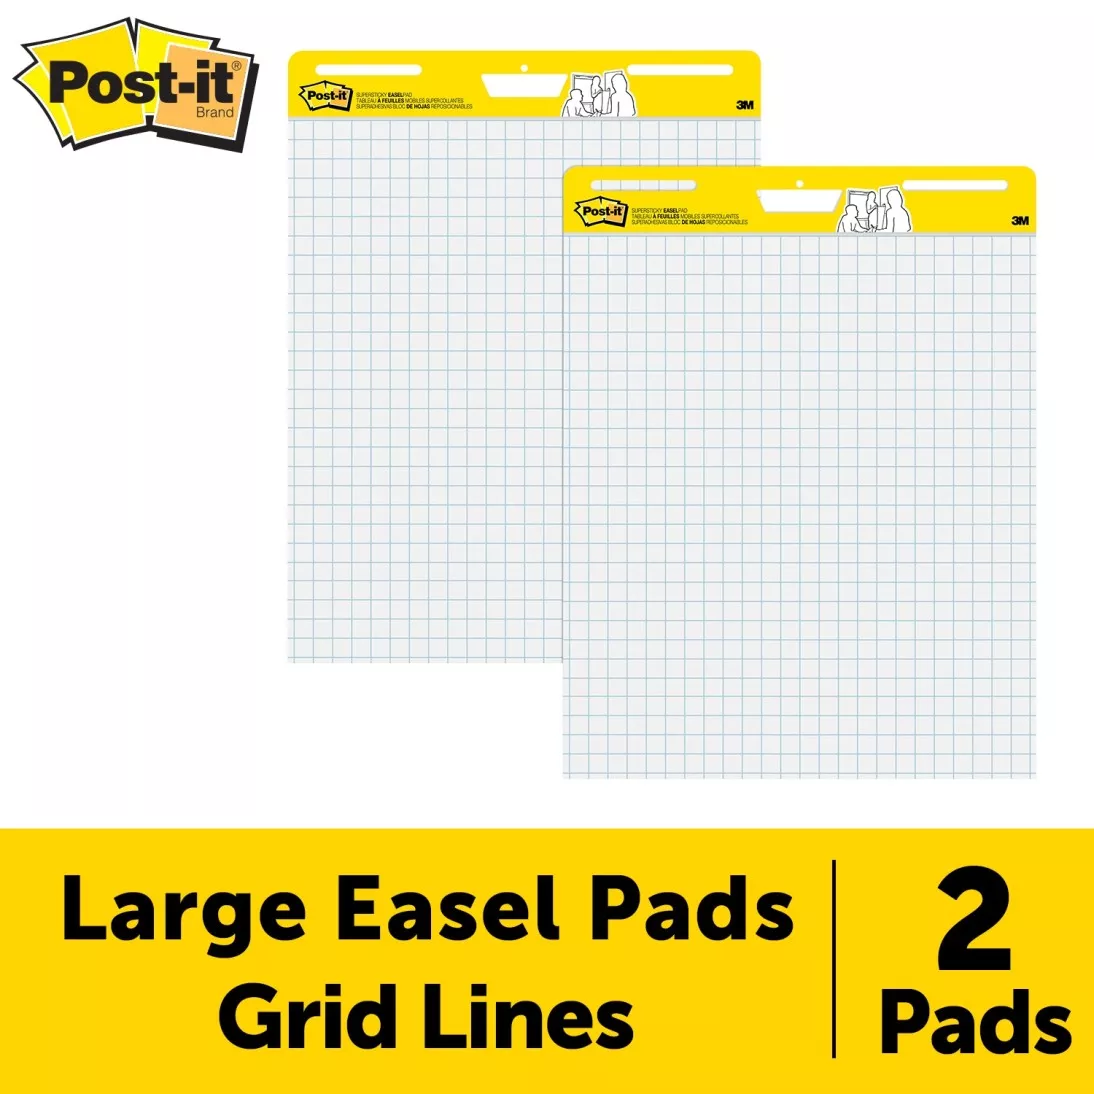 Post-it® Super Sticky Easel Pad 560, 25 in x 30 in sheets, White with
Grid, 30 Sheets/Pad, 2 Pads/Pack